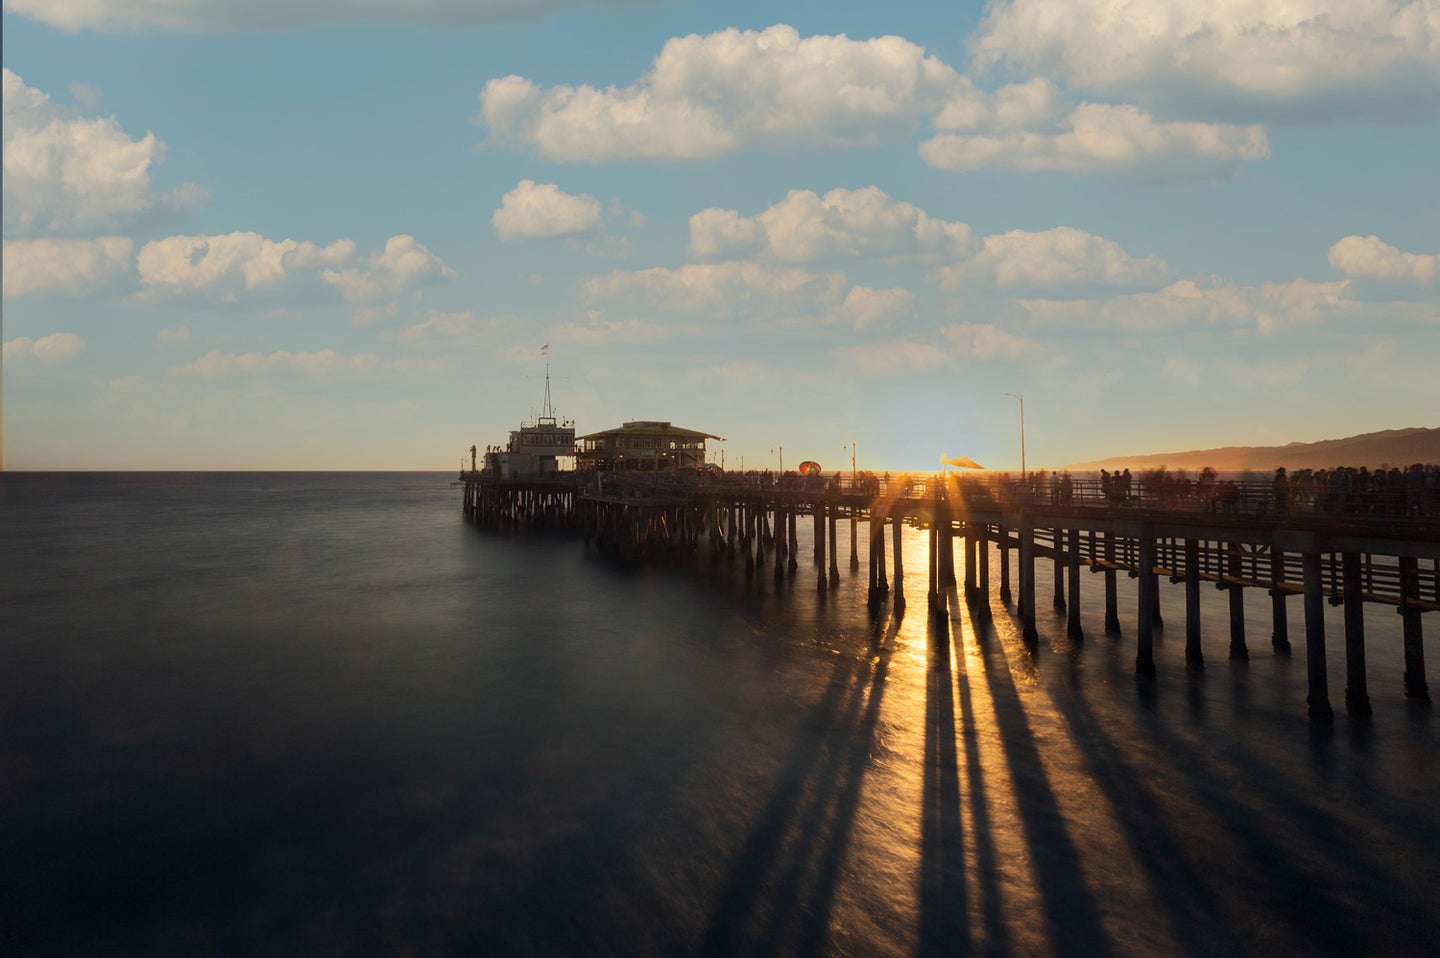 Badly edited photo of a pier during sunset